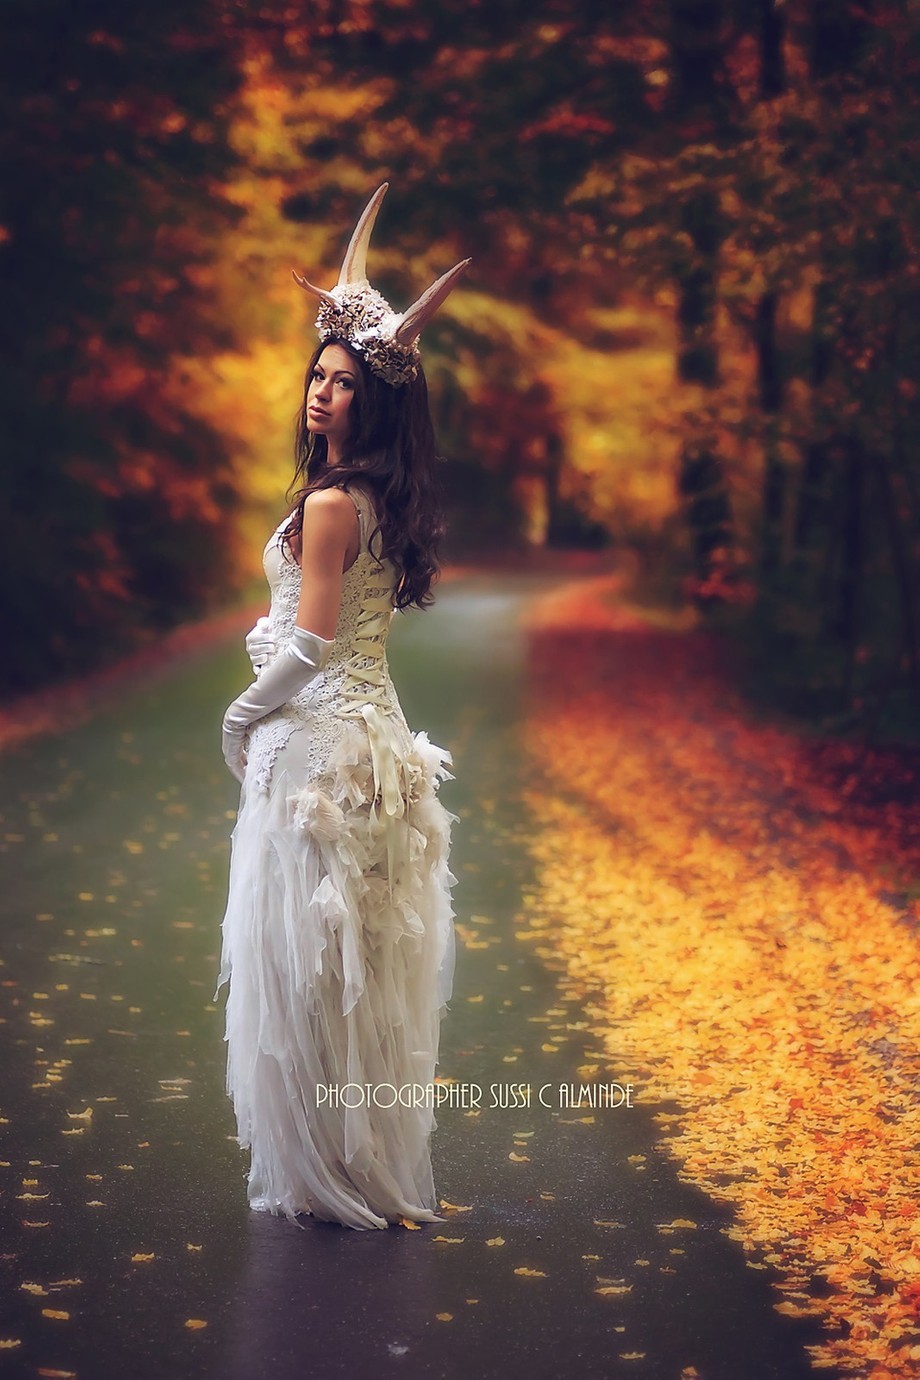 Autumn soul by sussicharlottealminde - A Fantasy World Photo Contest